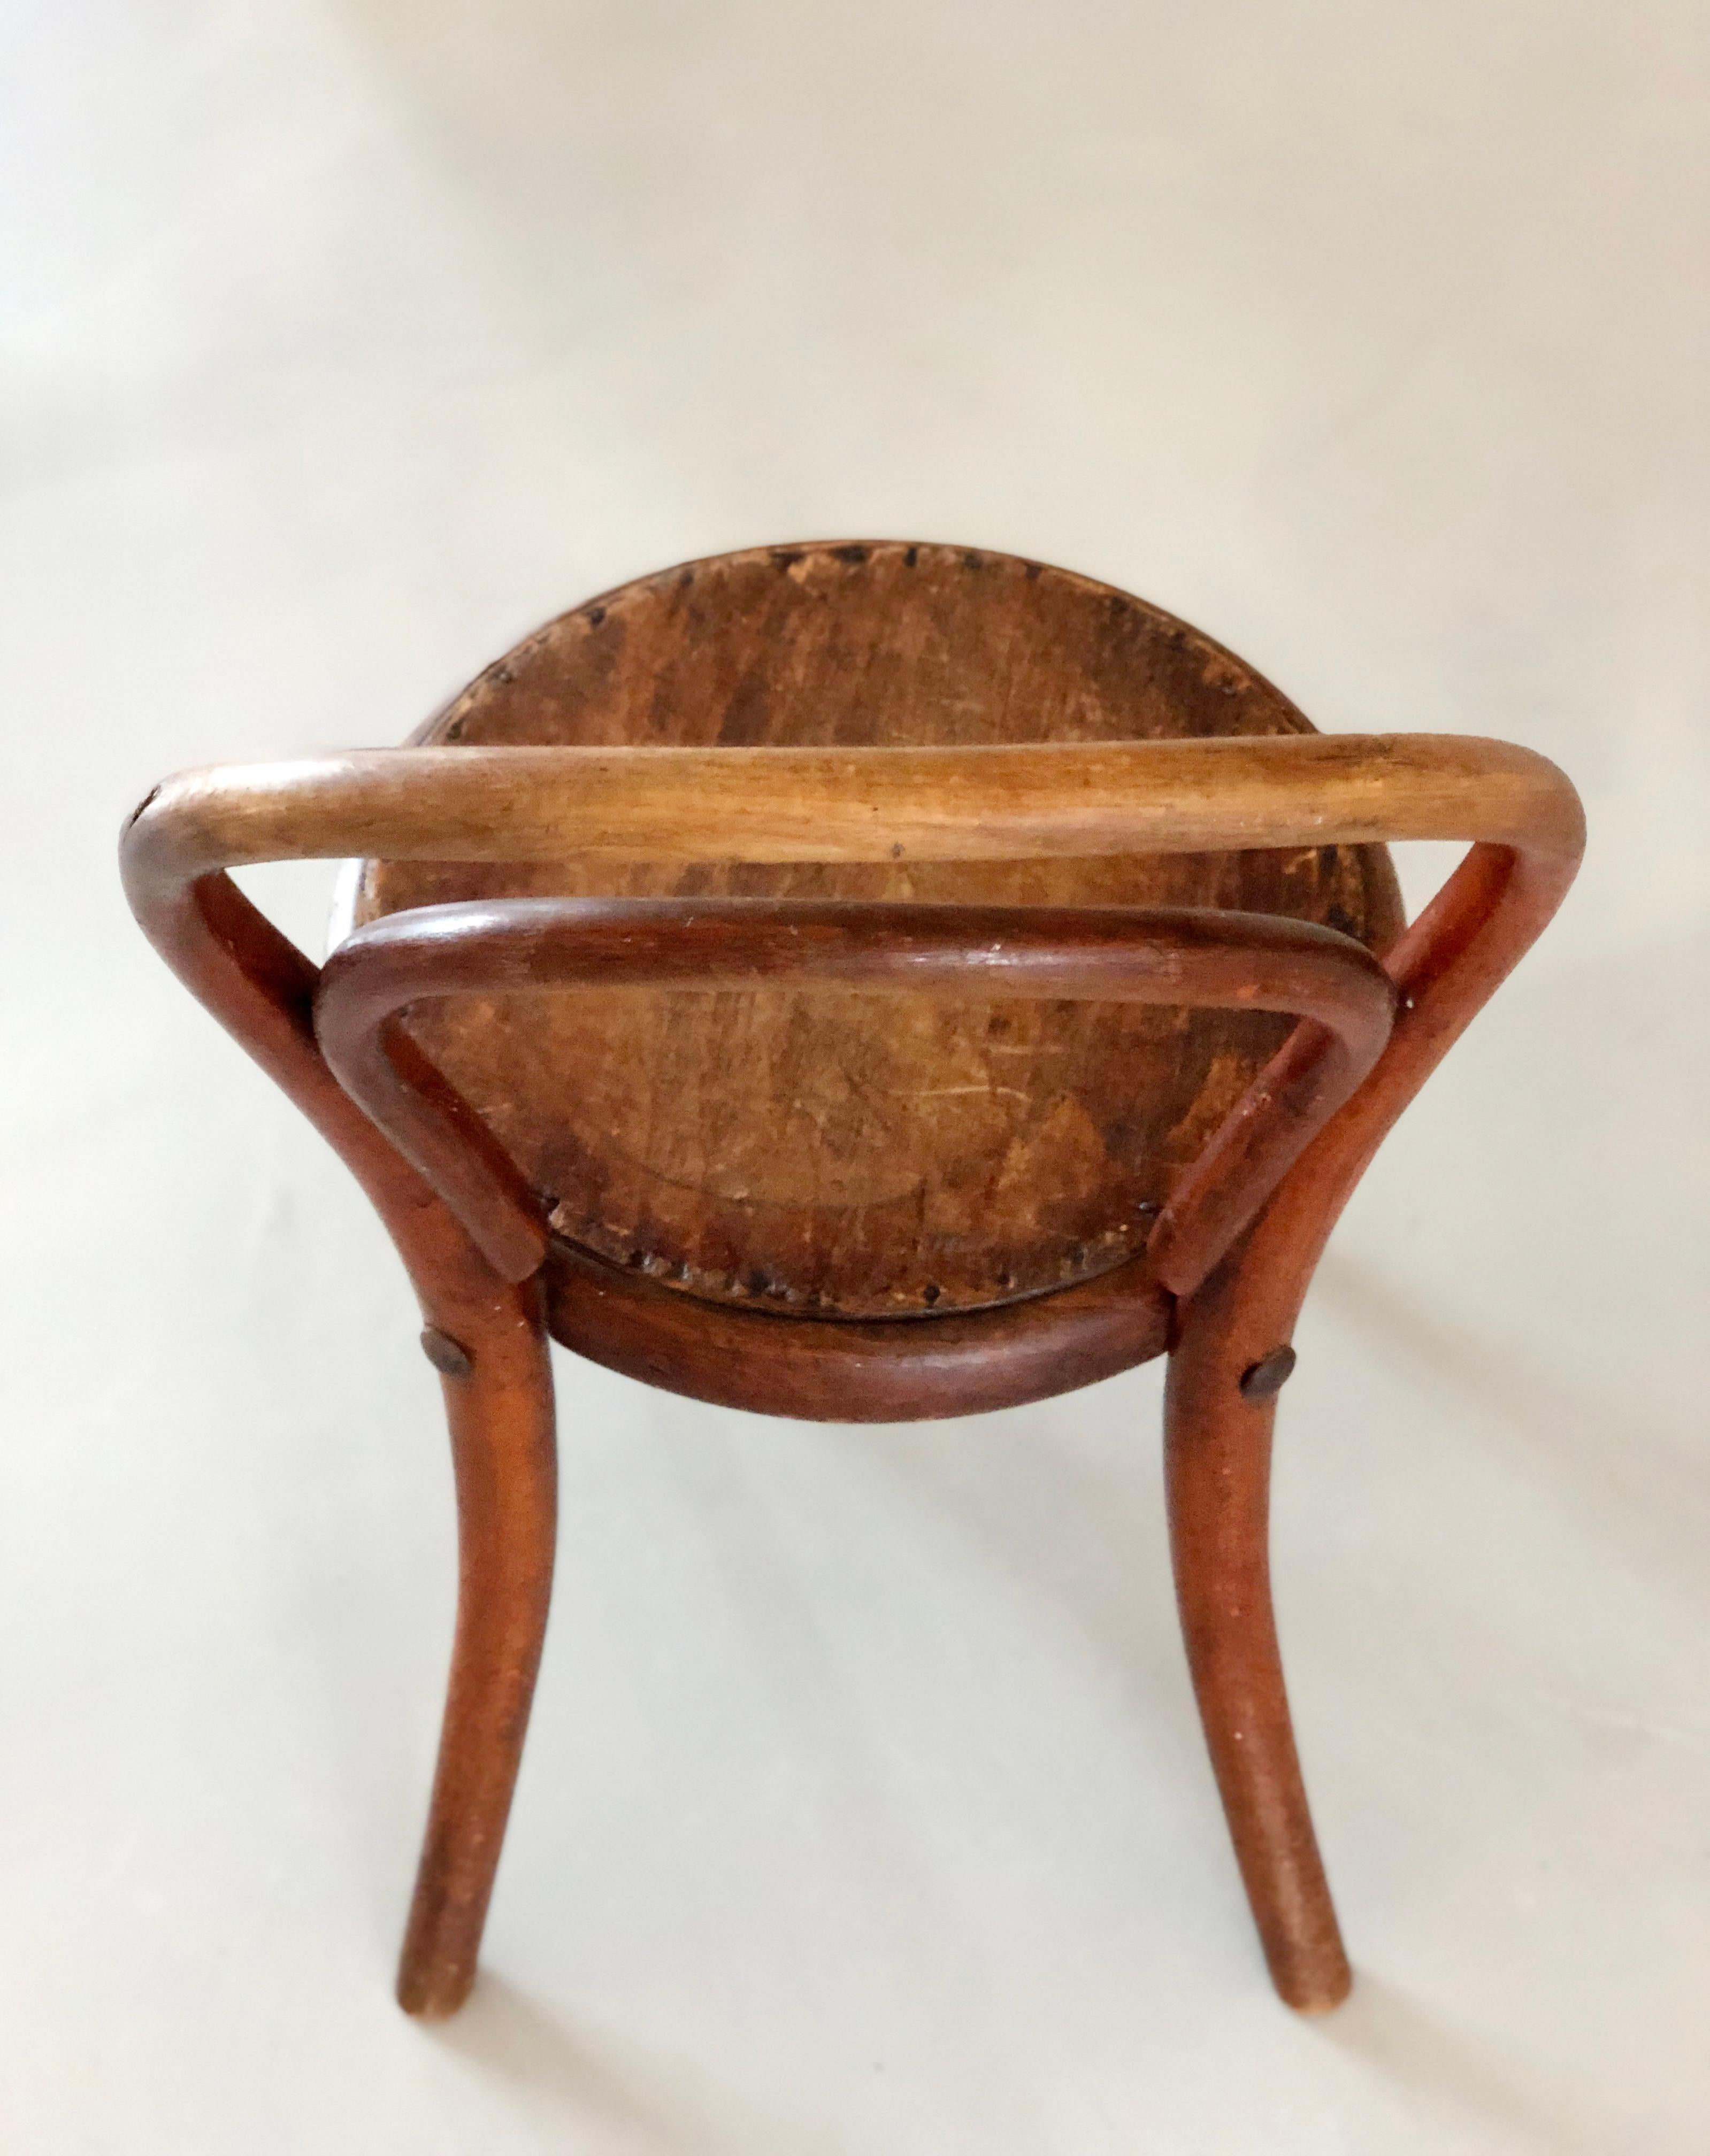 Hand-Crafted Thonet Child Chair No14 / designed 1859 Vienna / Stamped and labeled / Bentwood